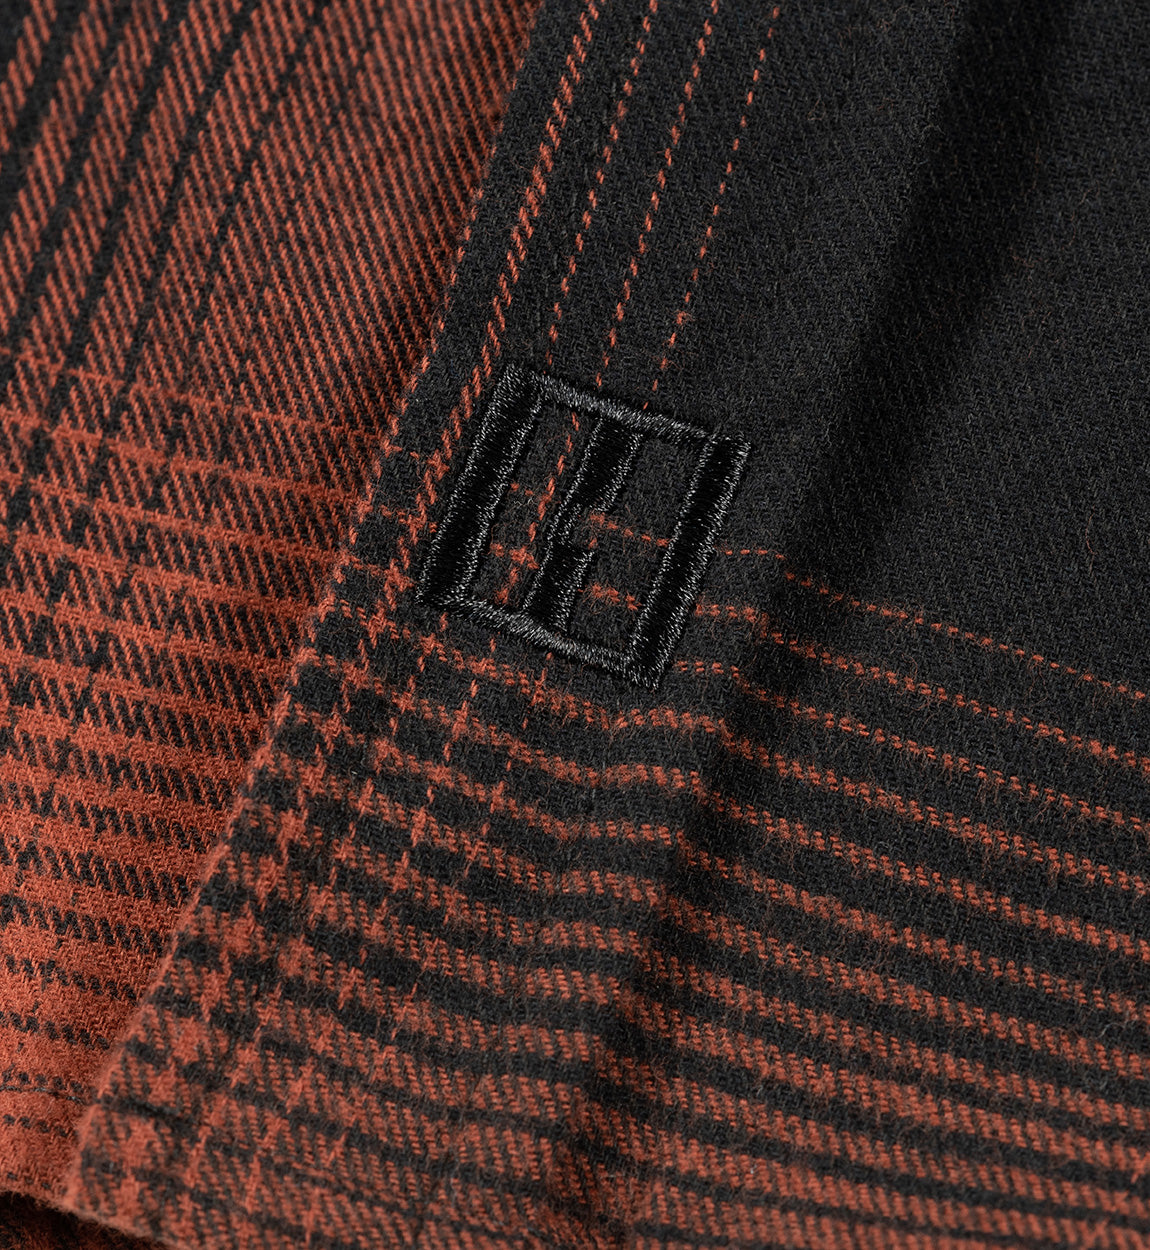 Dress up and stay warm with the NEW NEW Hoonigan RUST woven flannel.